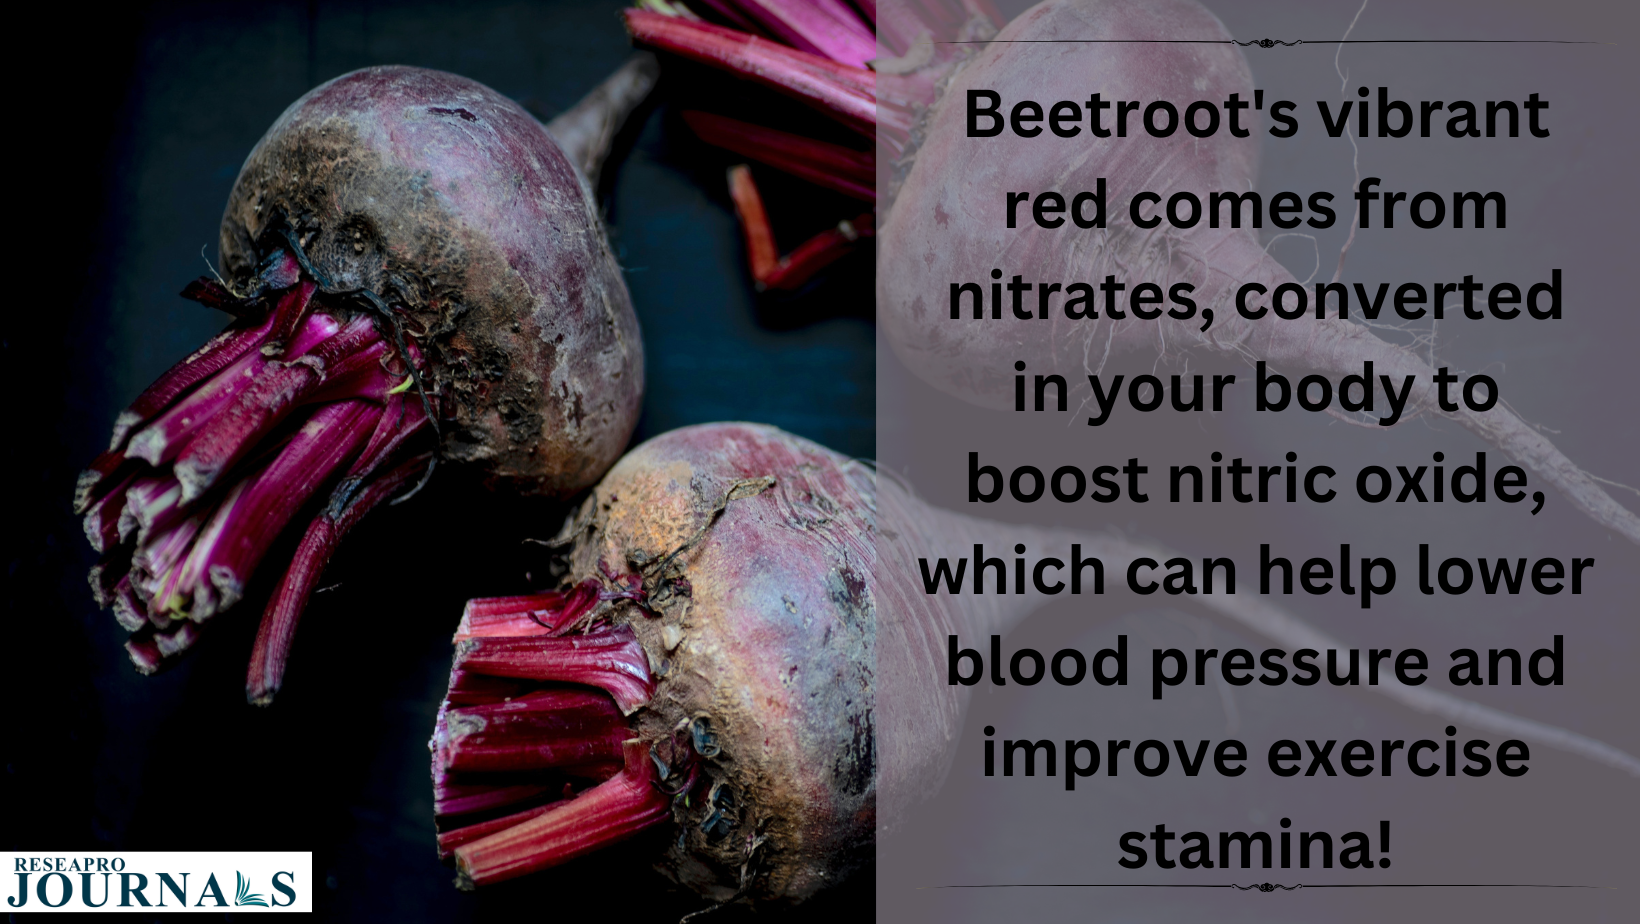 Nature’s workout buddy- Beetroot’s nitrates boost stamina & improve blood flow